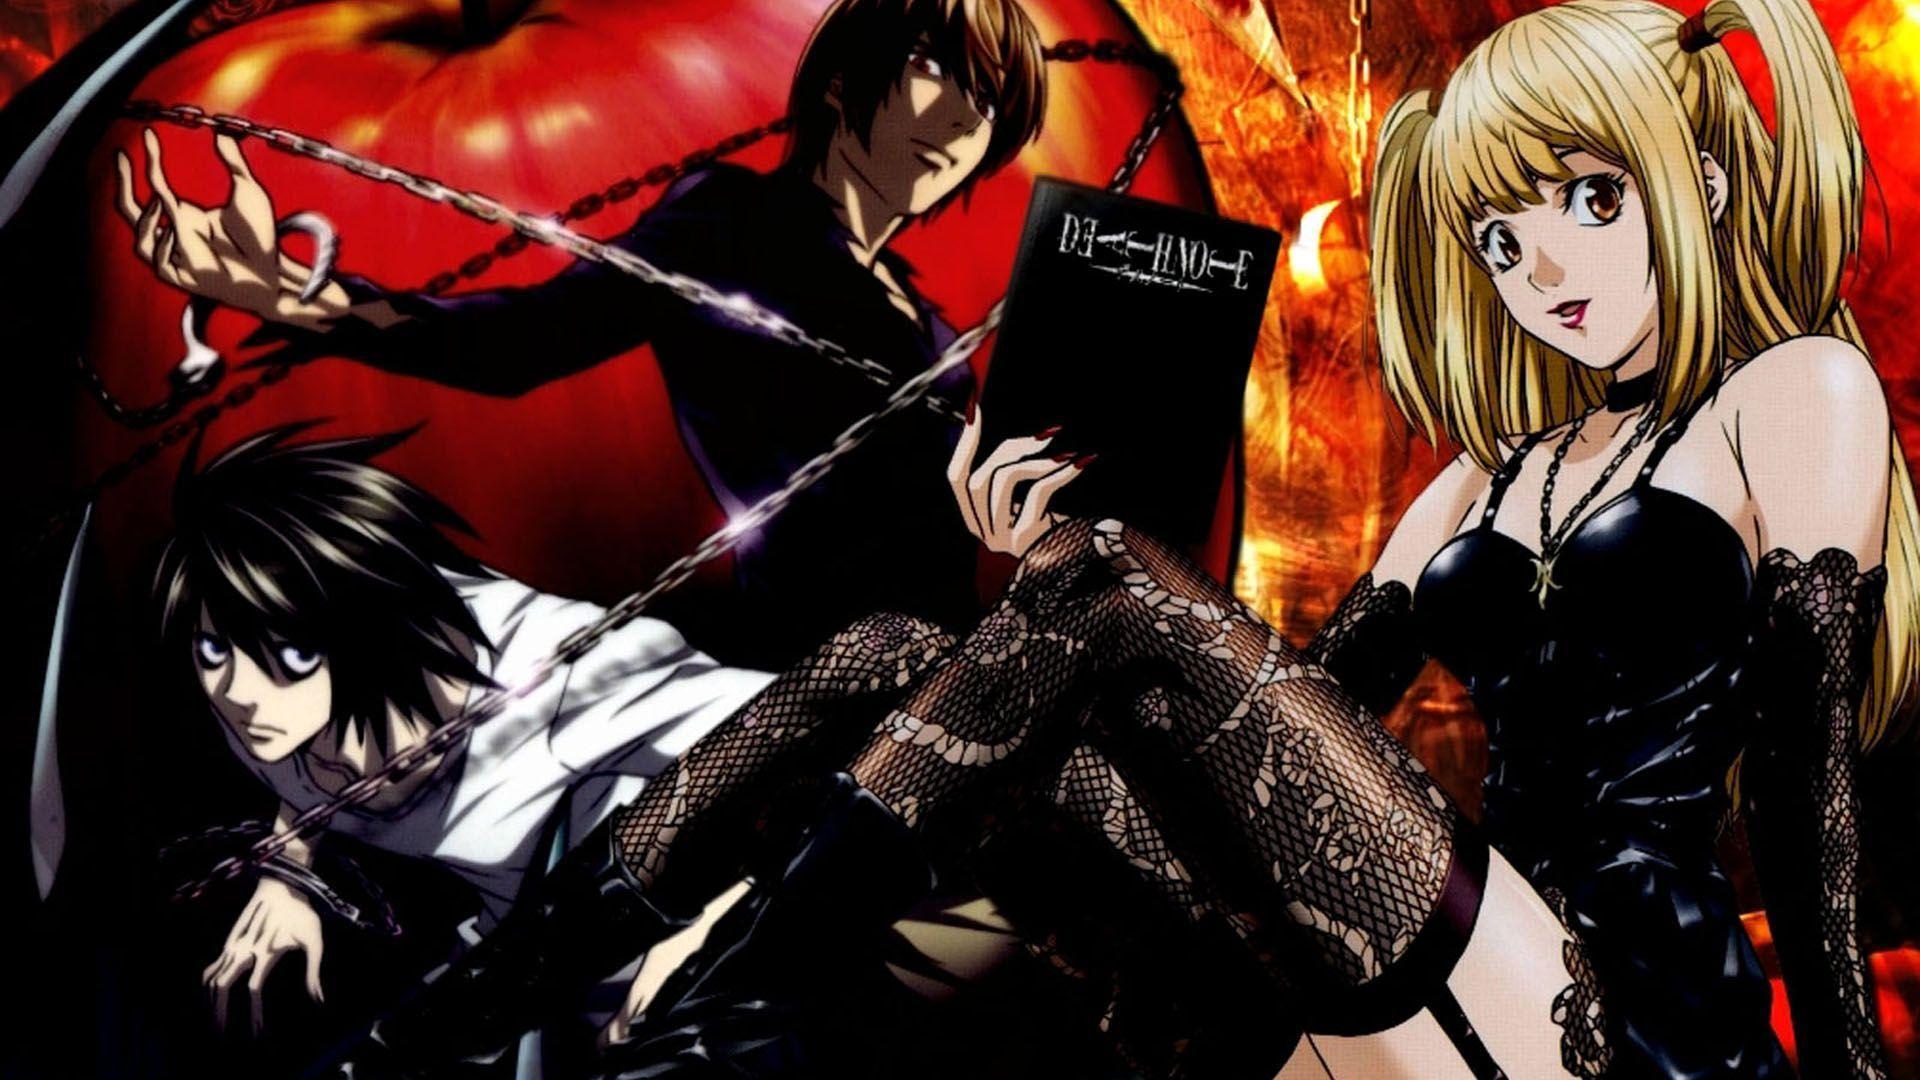 Death note, one of the best anime I've ever seen. Digital Art